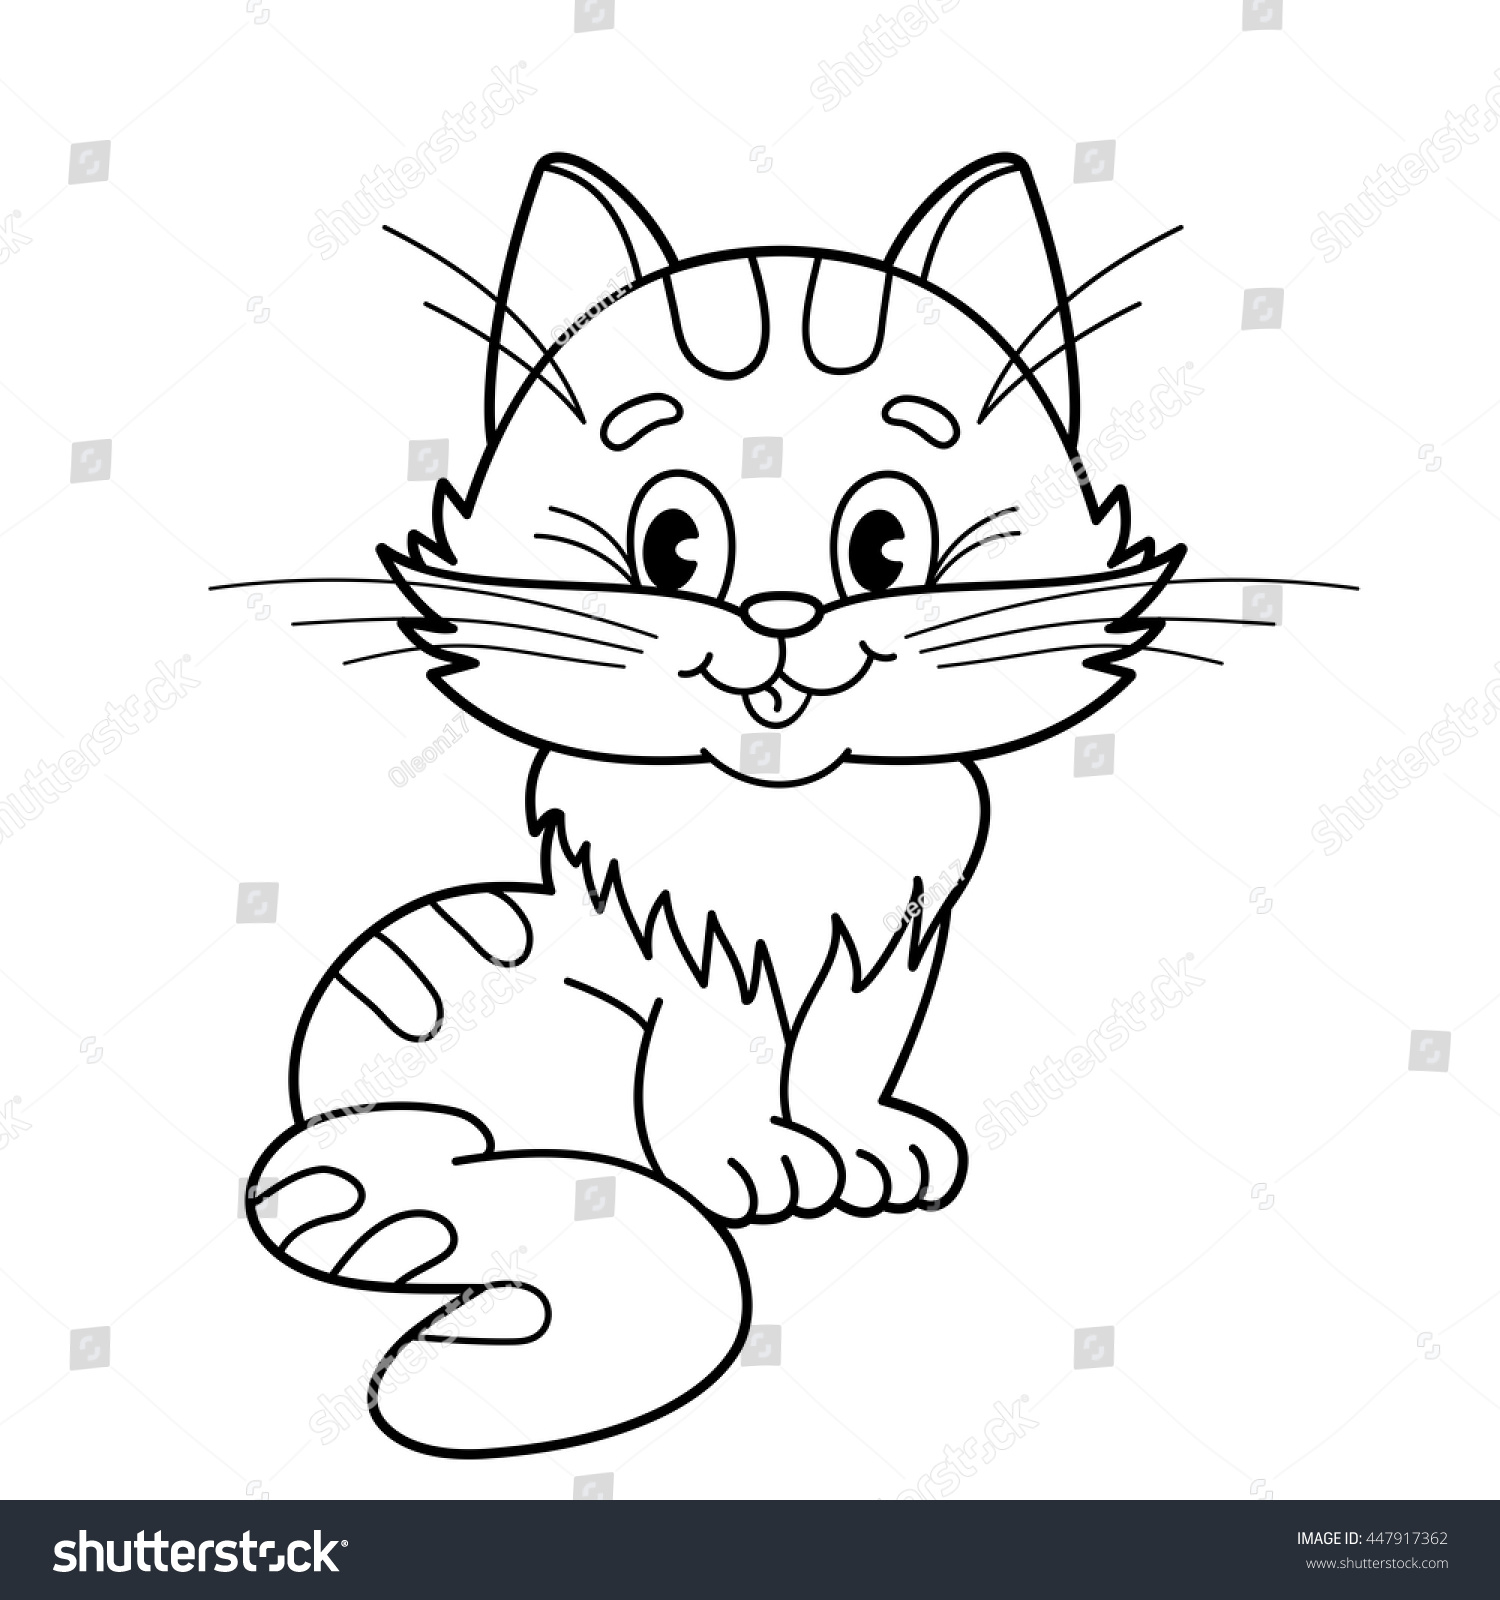 Download Coloring Page Outline Cartoon Fluffy Cat Stock Vector ...